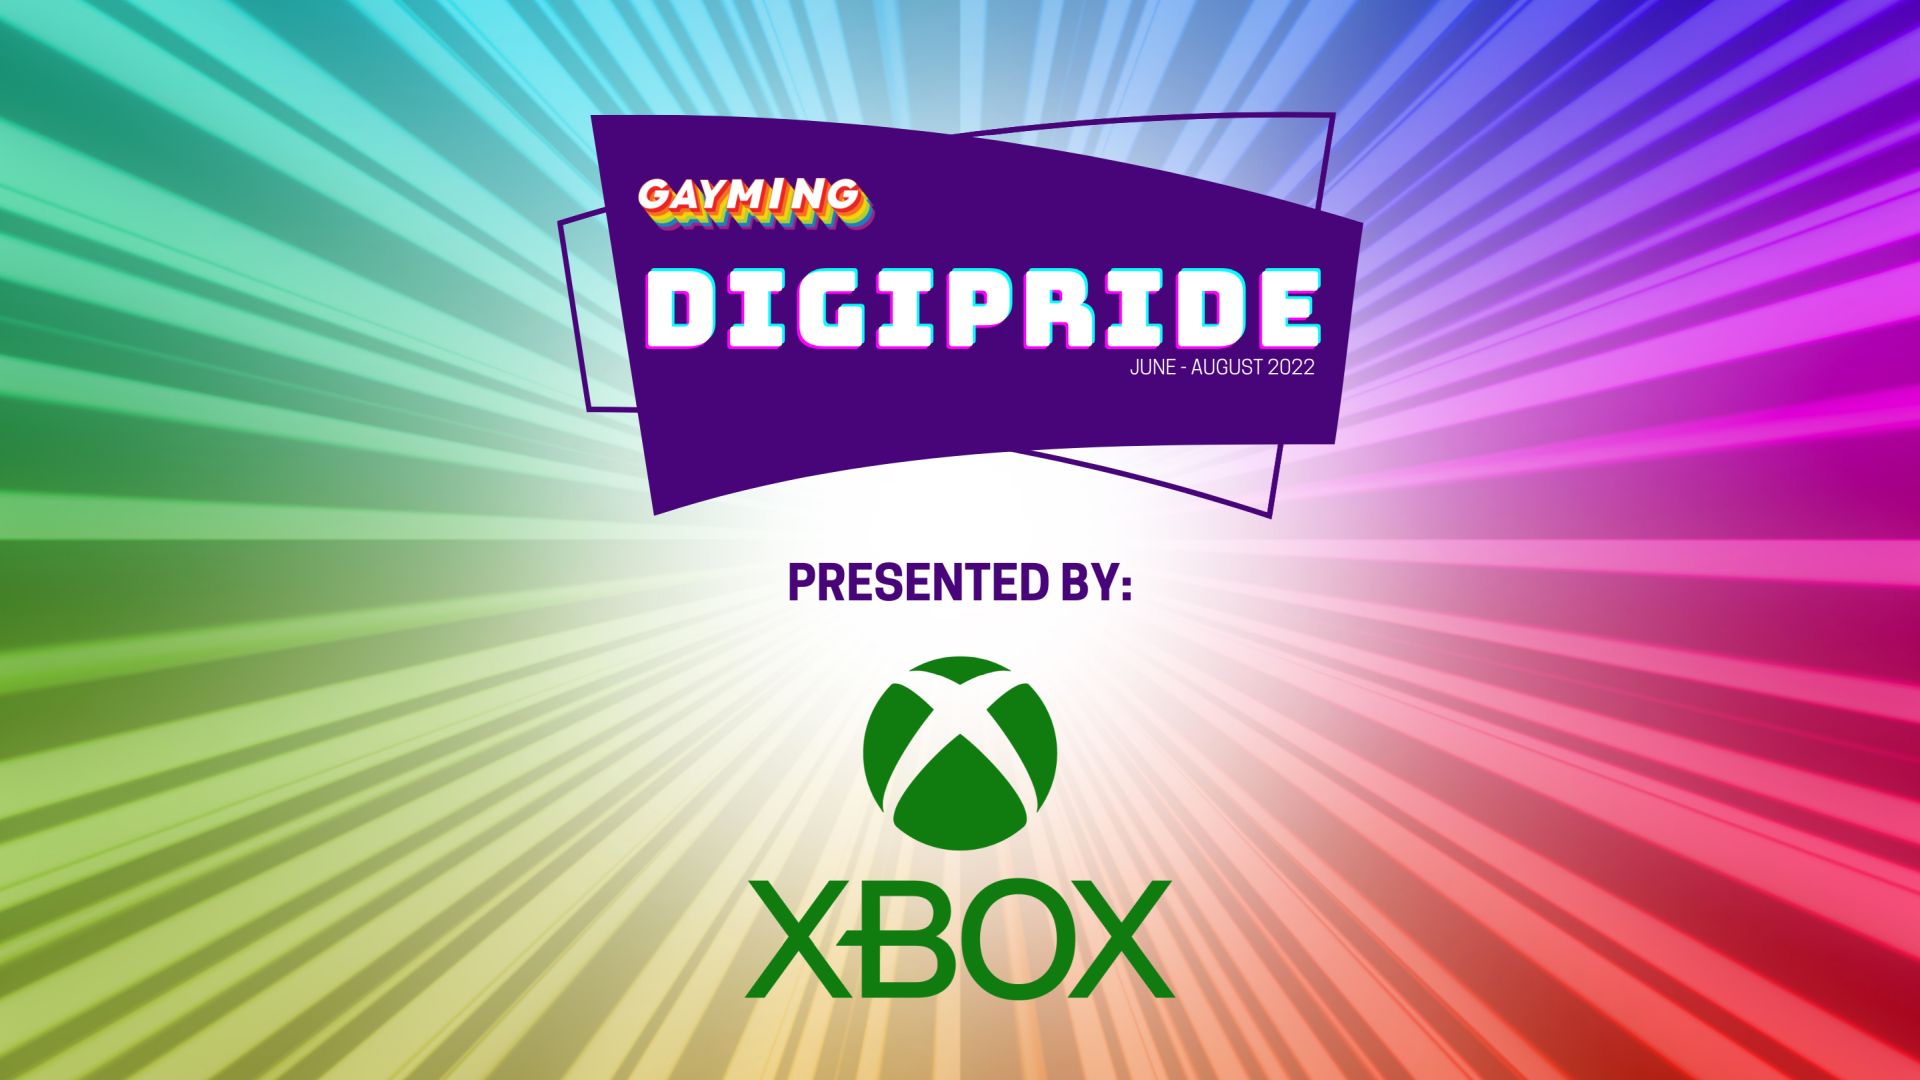 The DIGIPRIDE event graphic with Xbox logo featuring bright green, purple, pink, yellow and green radiating from shimmering light in center. 